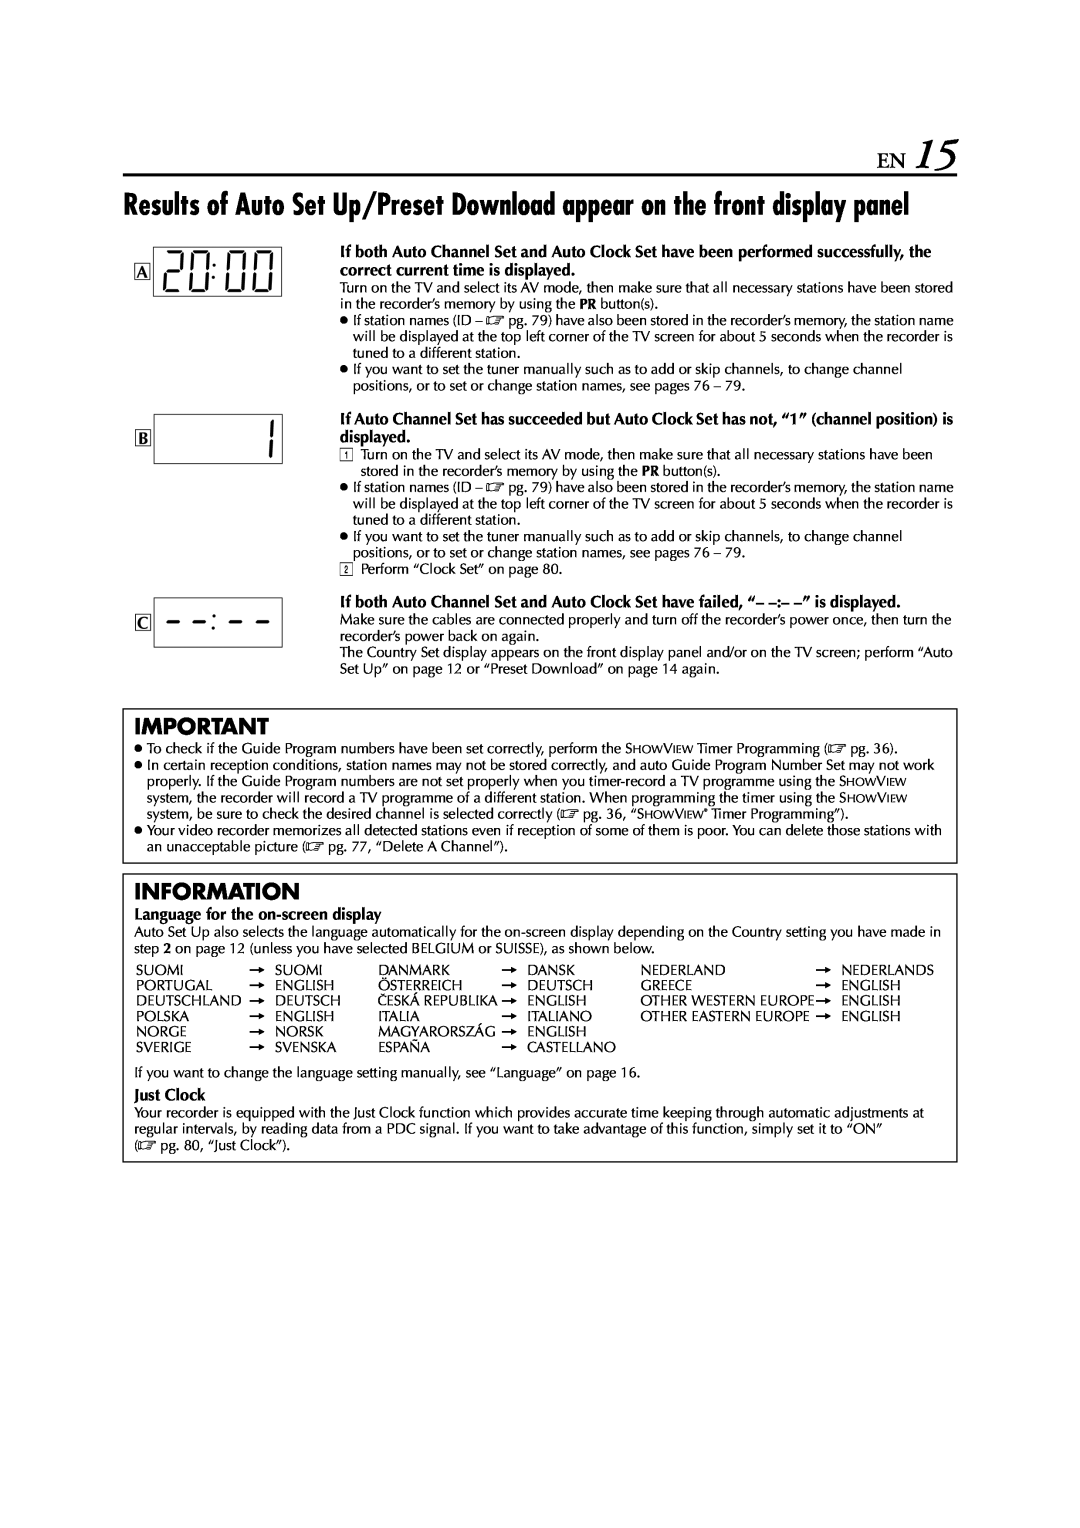 JVC LPT0616-001A specifications Information, Language for the on-screen display, Just Clock 